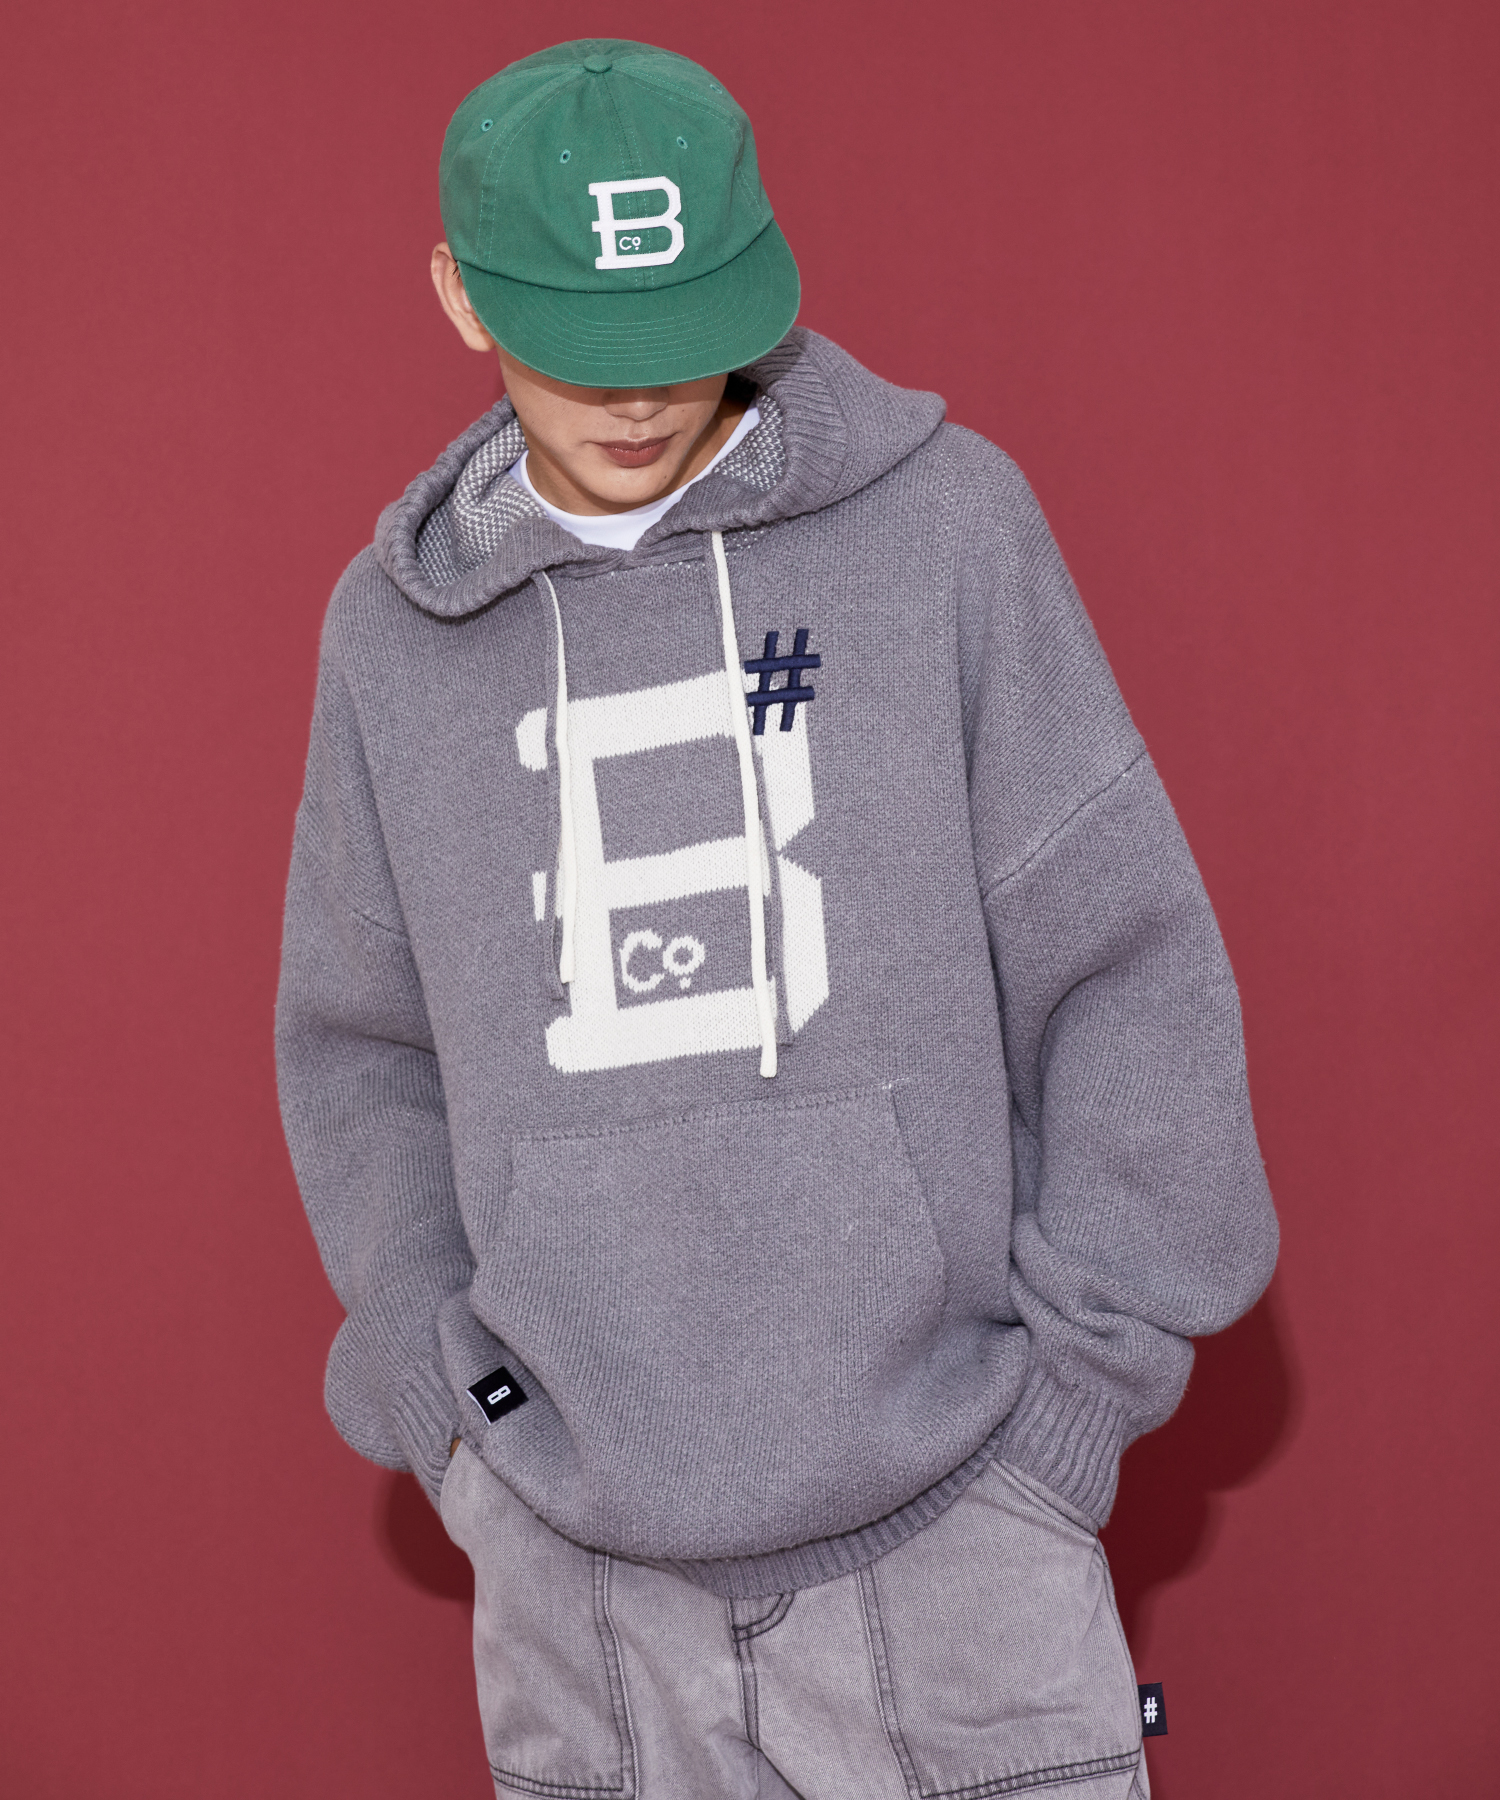 BEENTRILL X BROOKLYNDENIMCO OVERFIT HOODED KNIT SANS 니트후드 (GRAY)